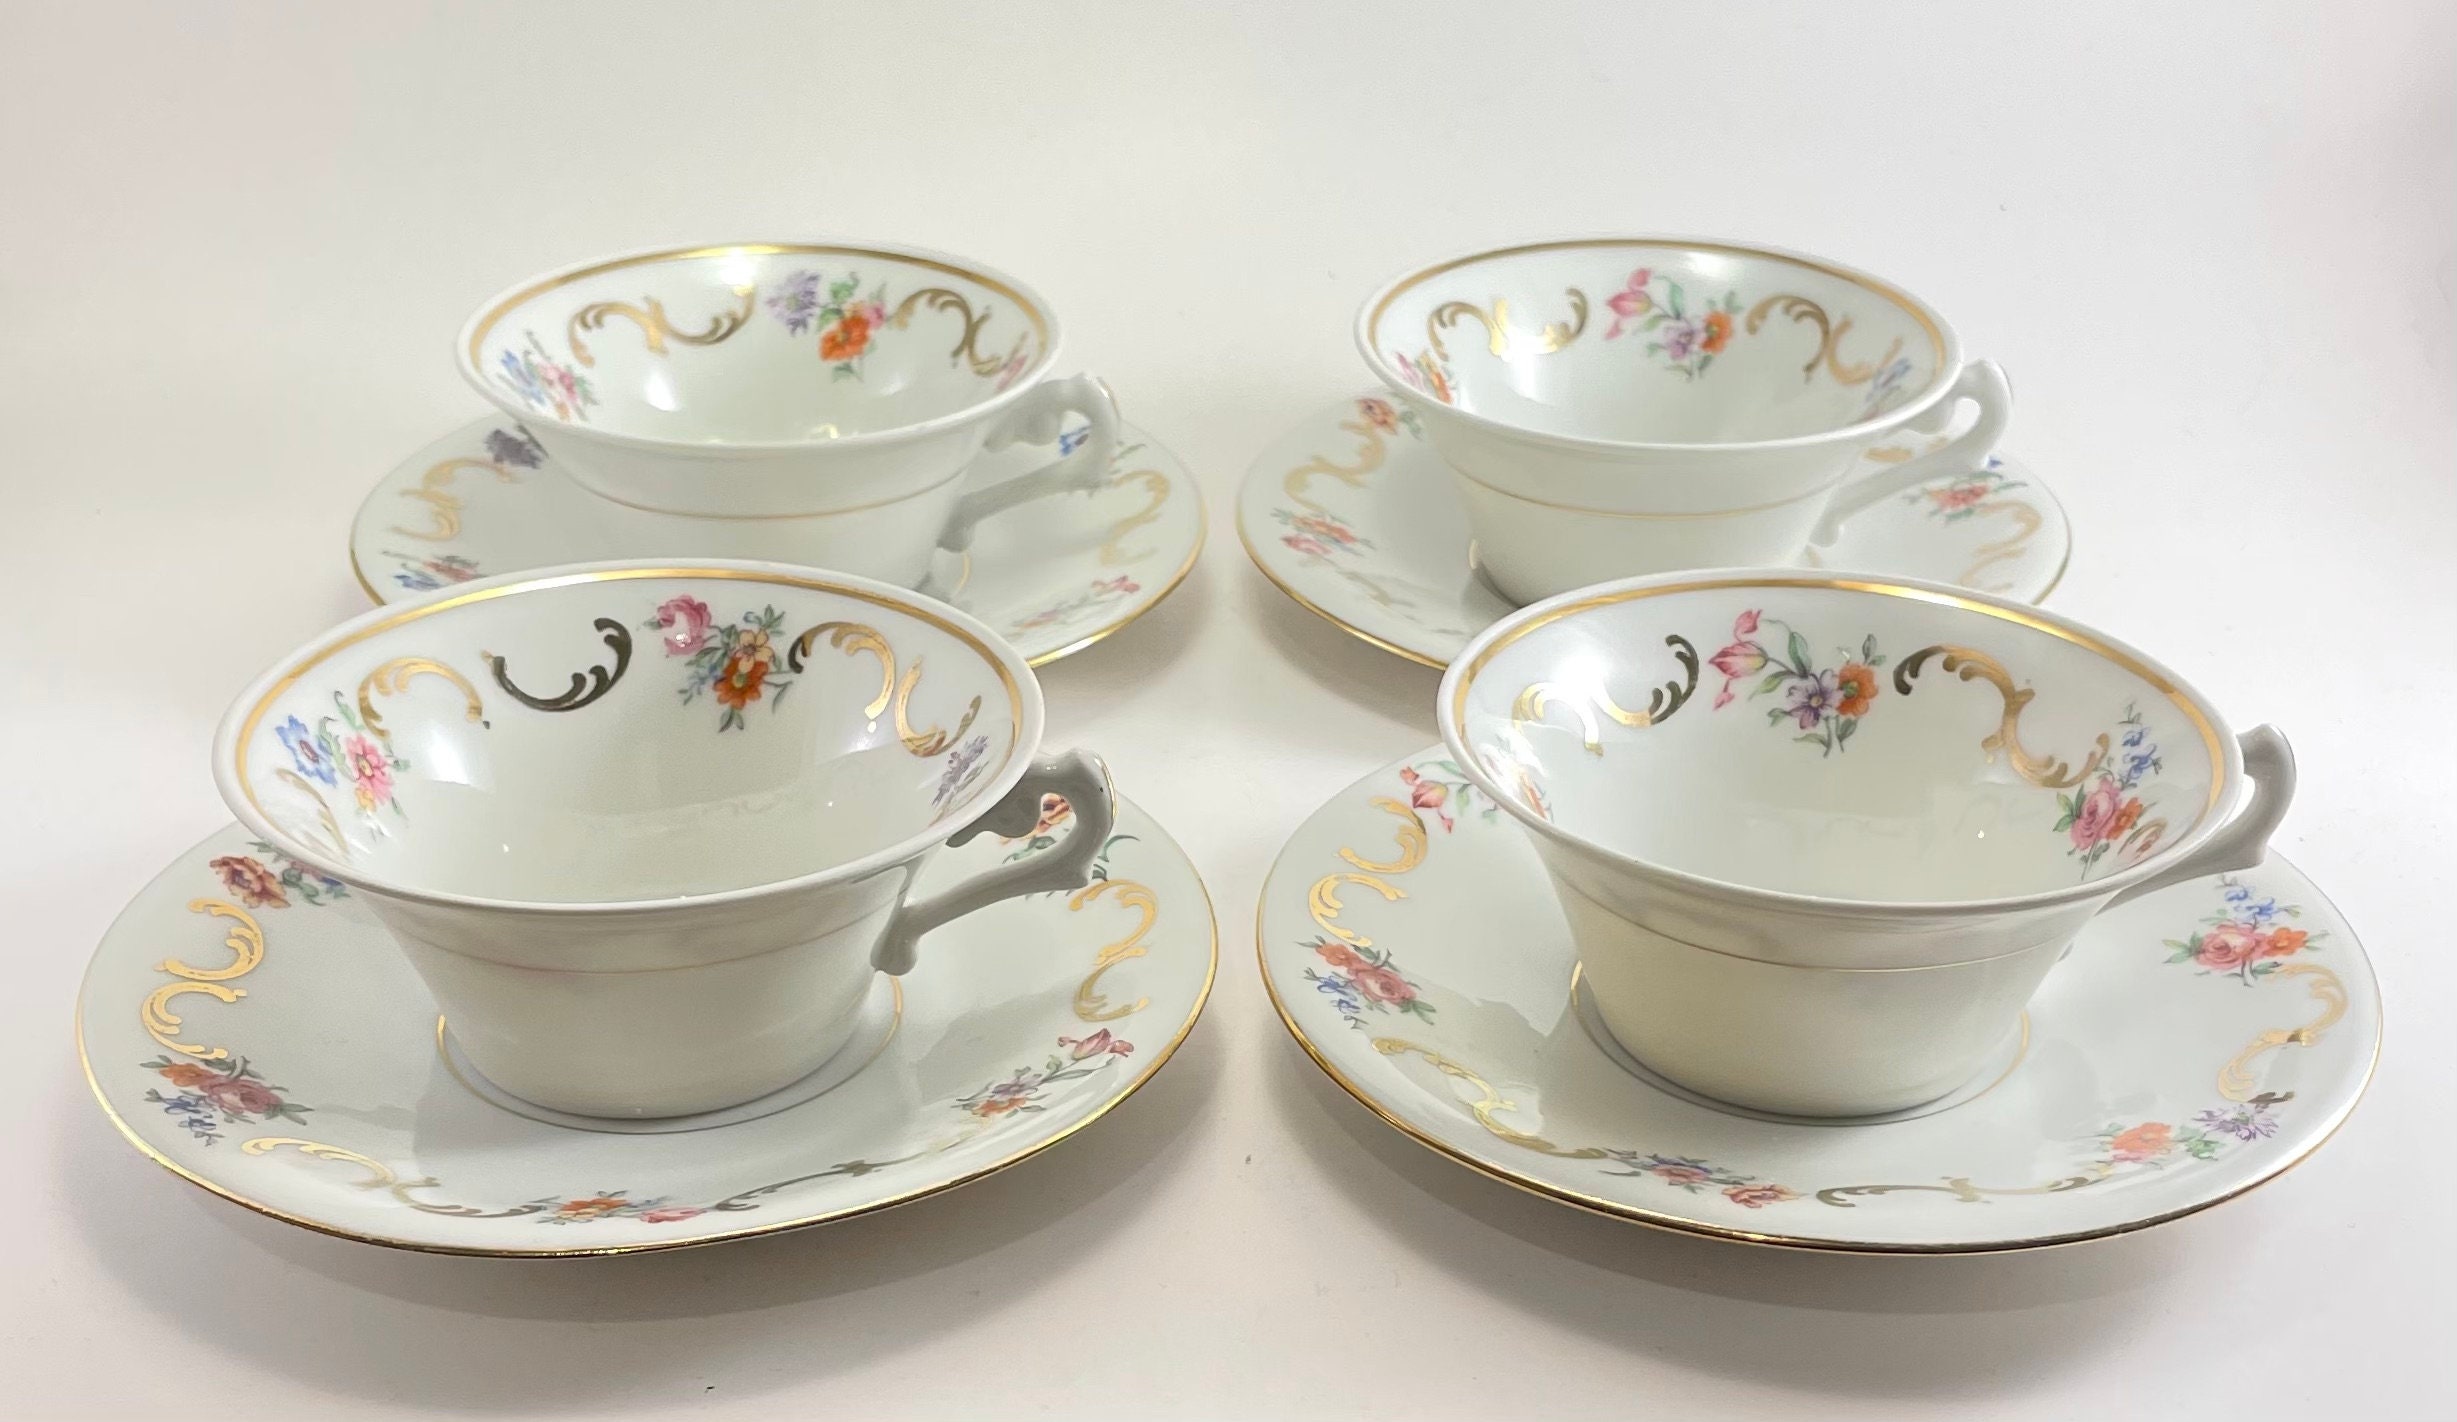 Antique Tea Cups & Saucers Set — French Antiques Vintage French